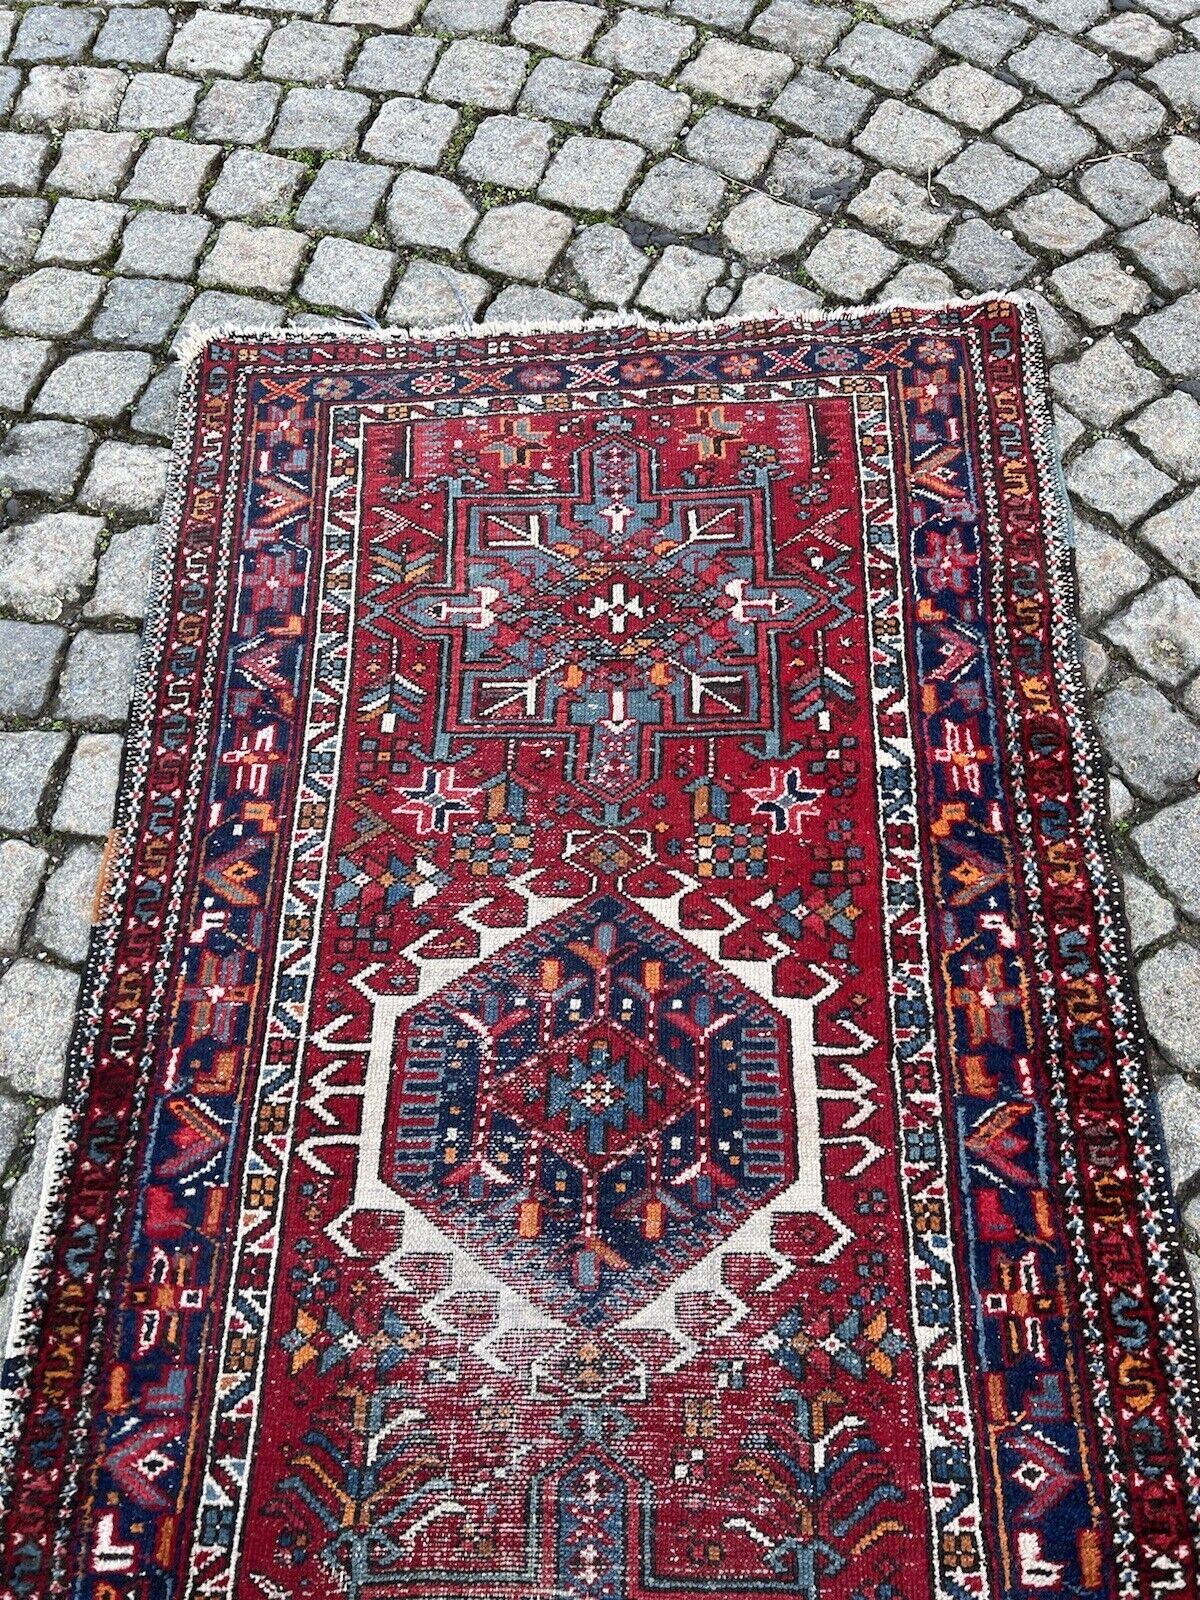 Handmade Antique Persian Style Karajeh Runner Rug
Overview:
Introducing our exquisite Handmade Antique Persian Style Karajeh Runner Rug, a true testament to timeless elegance and craftsmanship. This authentic piece hails from the 1920s, carrying